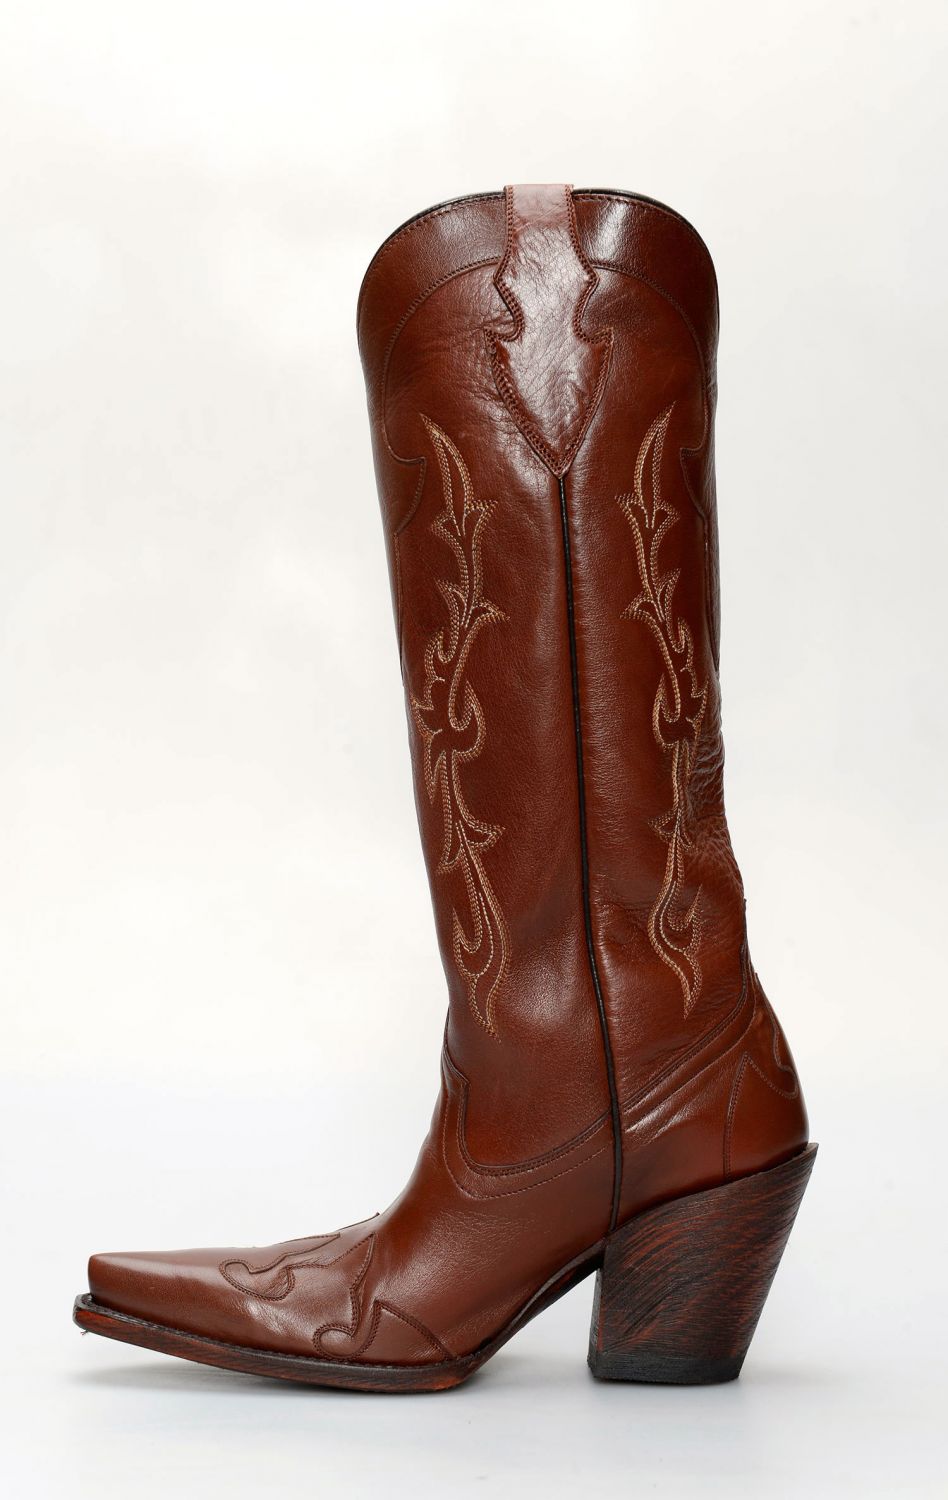 Jalisco boots in young brown leather with high heel and upper | 945 ...